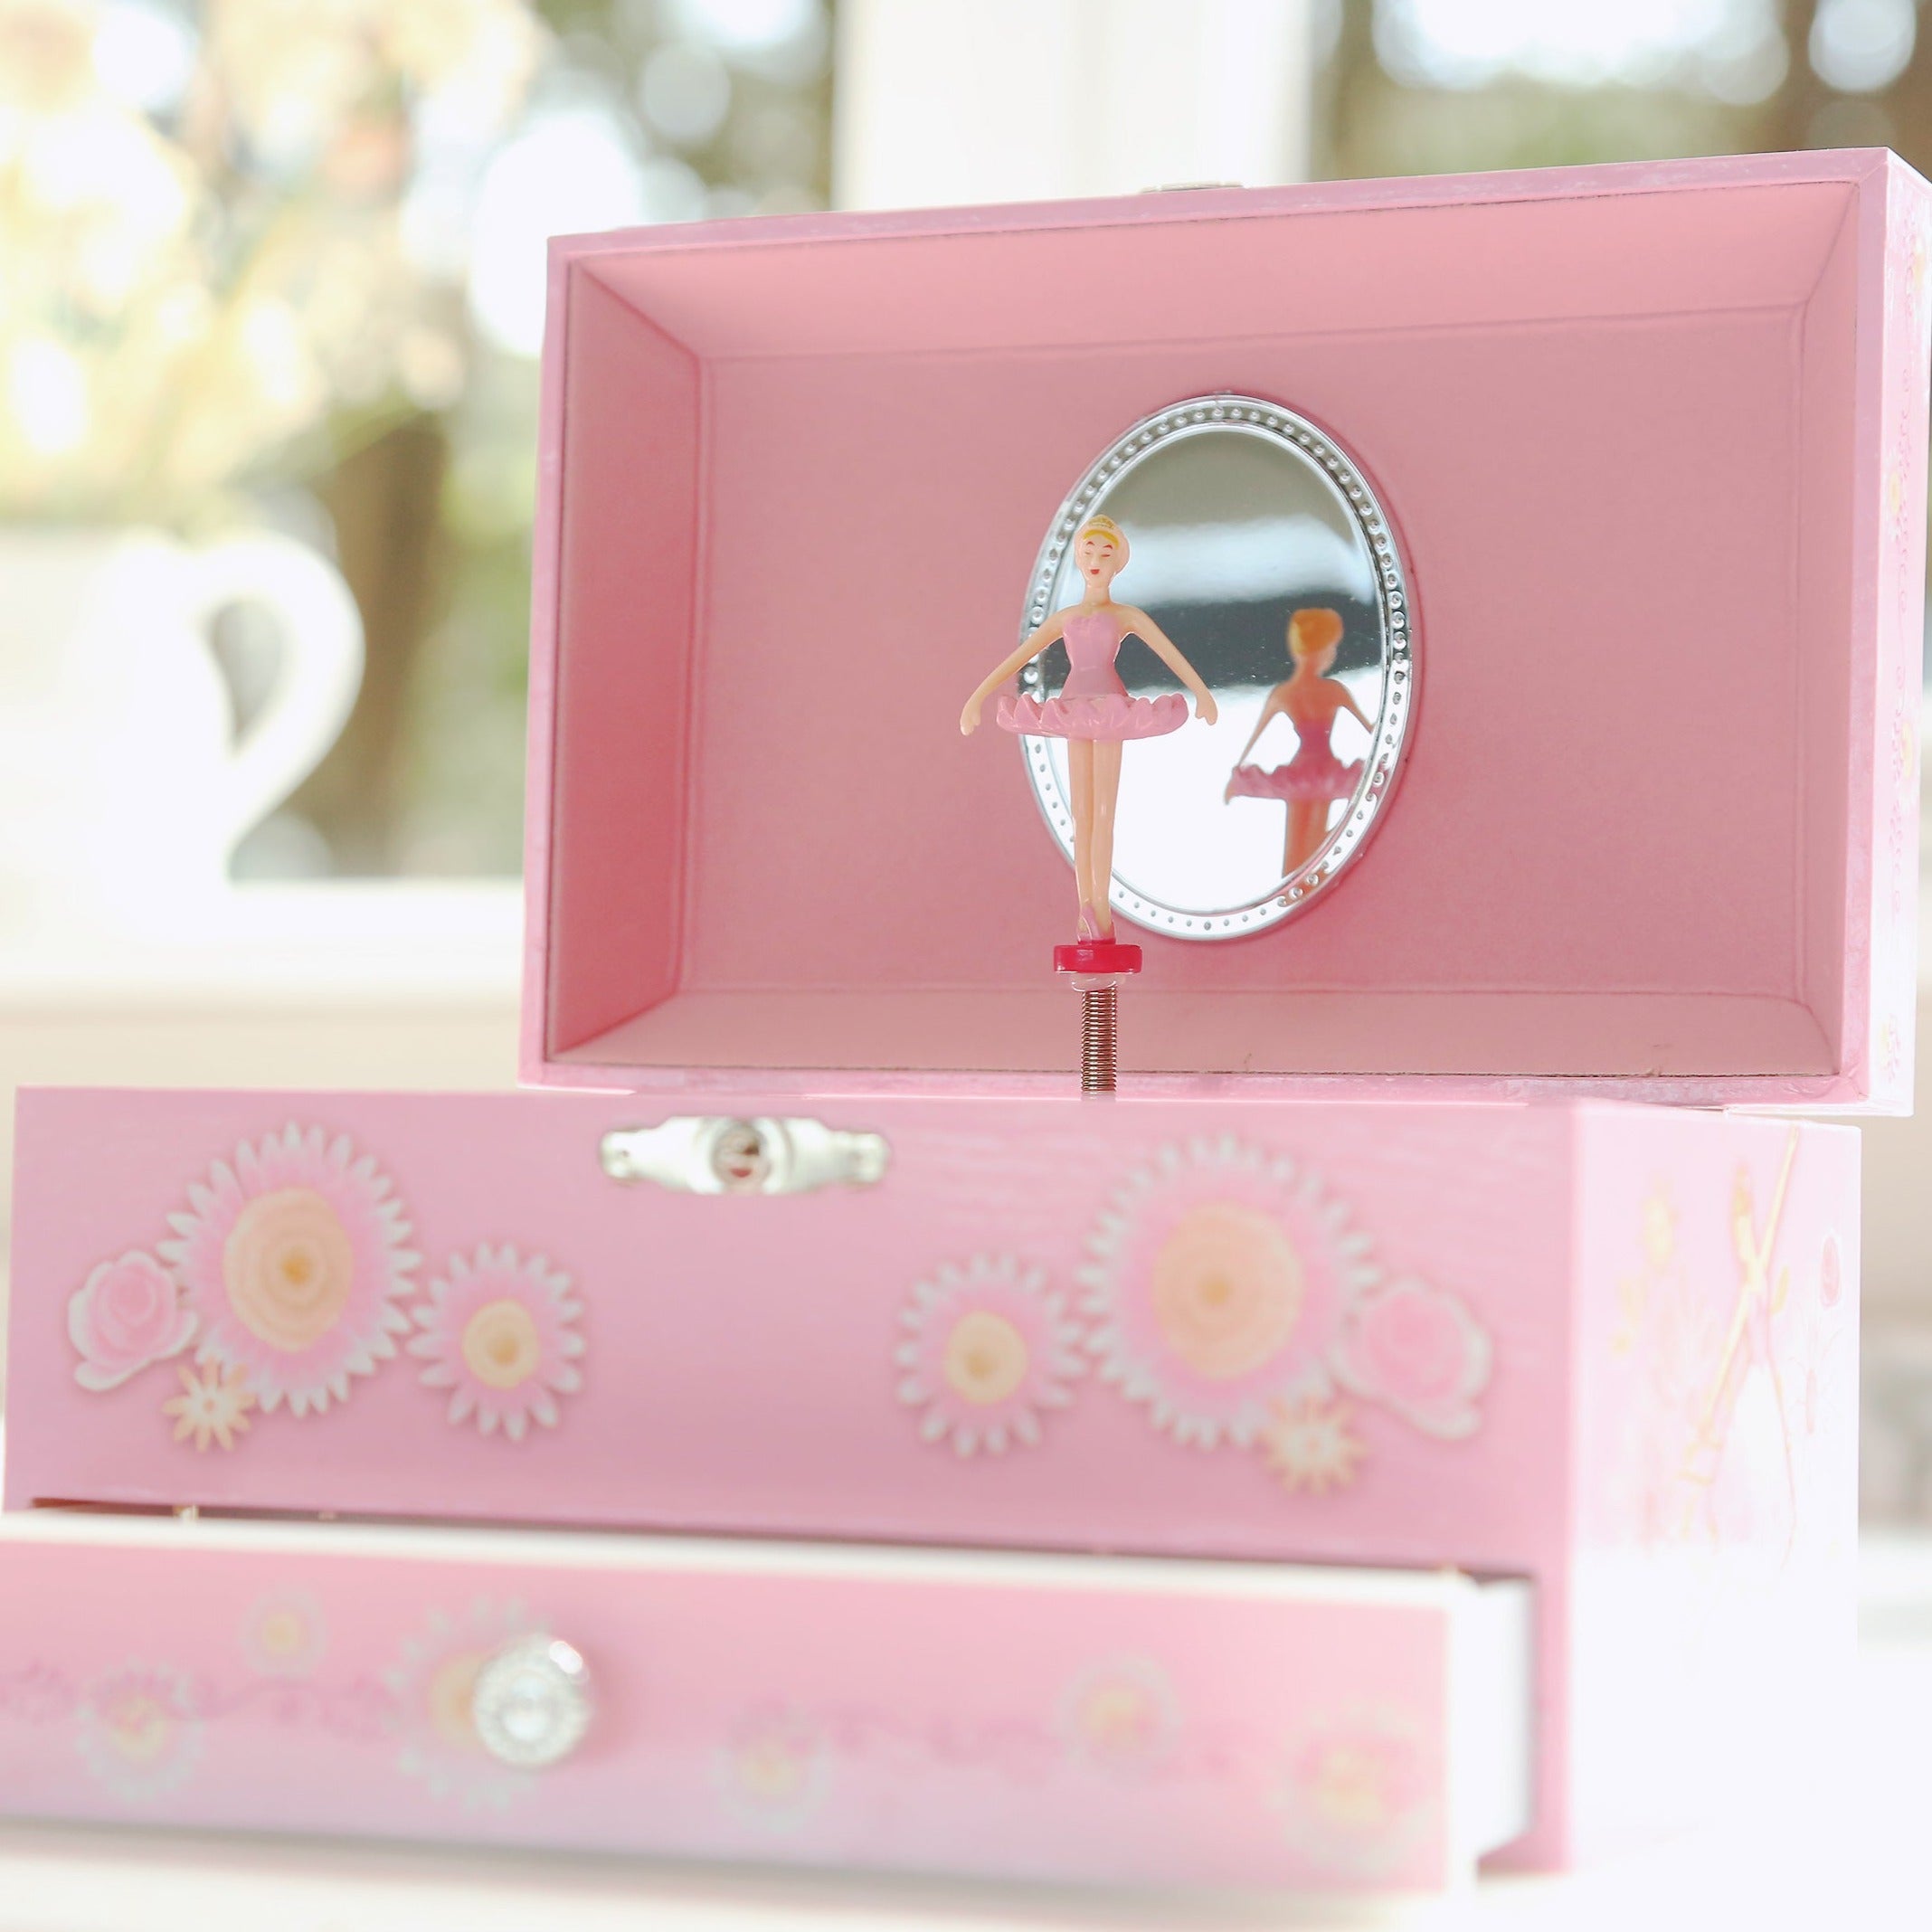 Charm of Music Jewelry Boxes: A Delightful Keepsake插图3